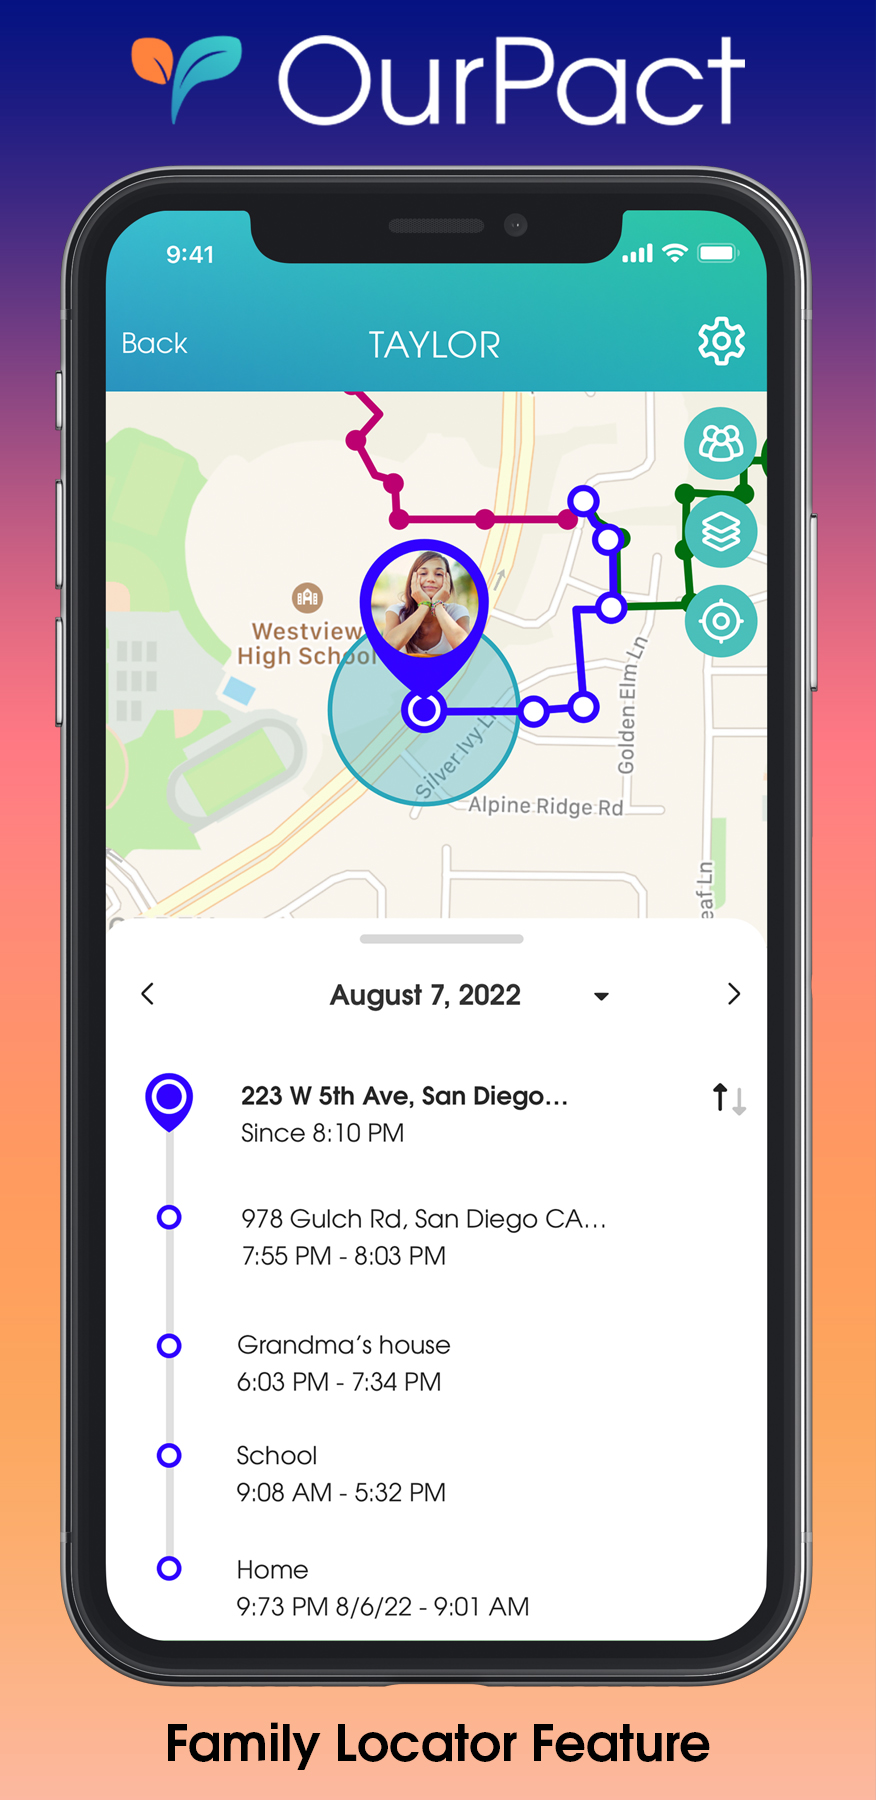 OurPact's enhanced Family Locator Tool allows parents to follow their kids 24/7 with precise location and history tracking